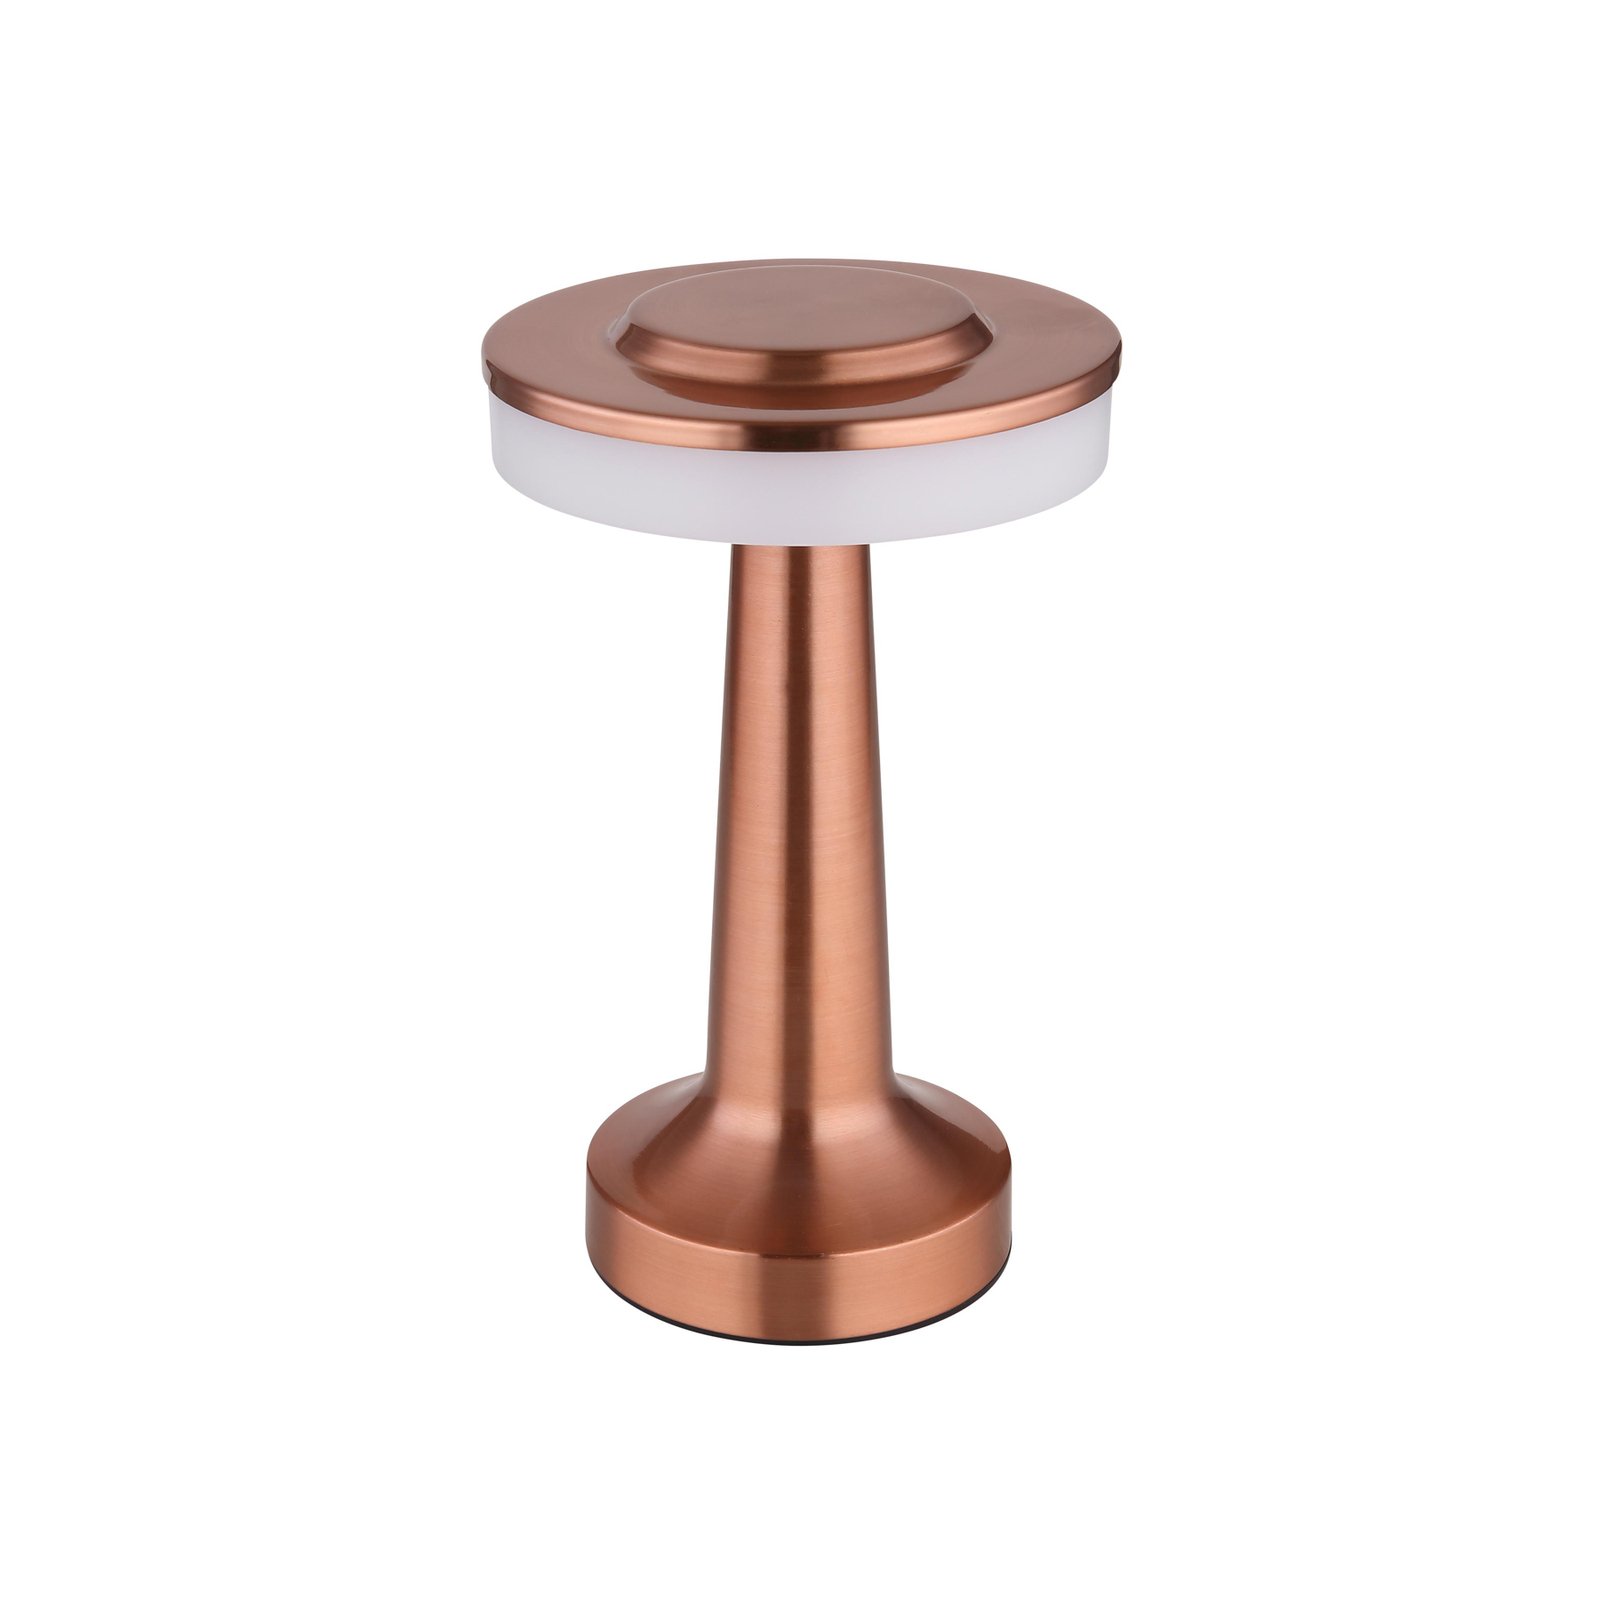 LED table lamp Chloey, copper-coloured, height 20 cm, CCT